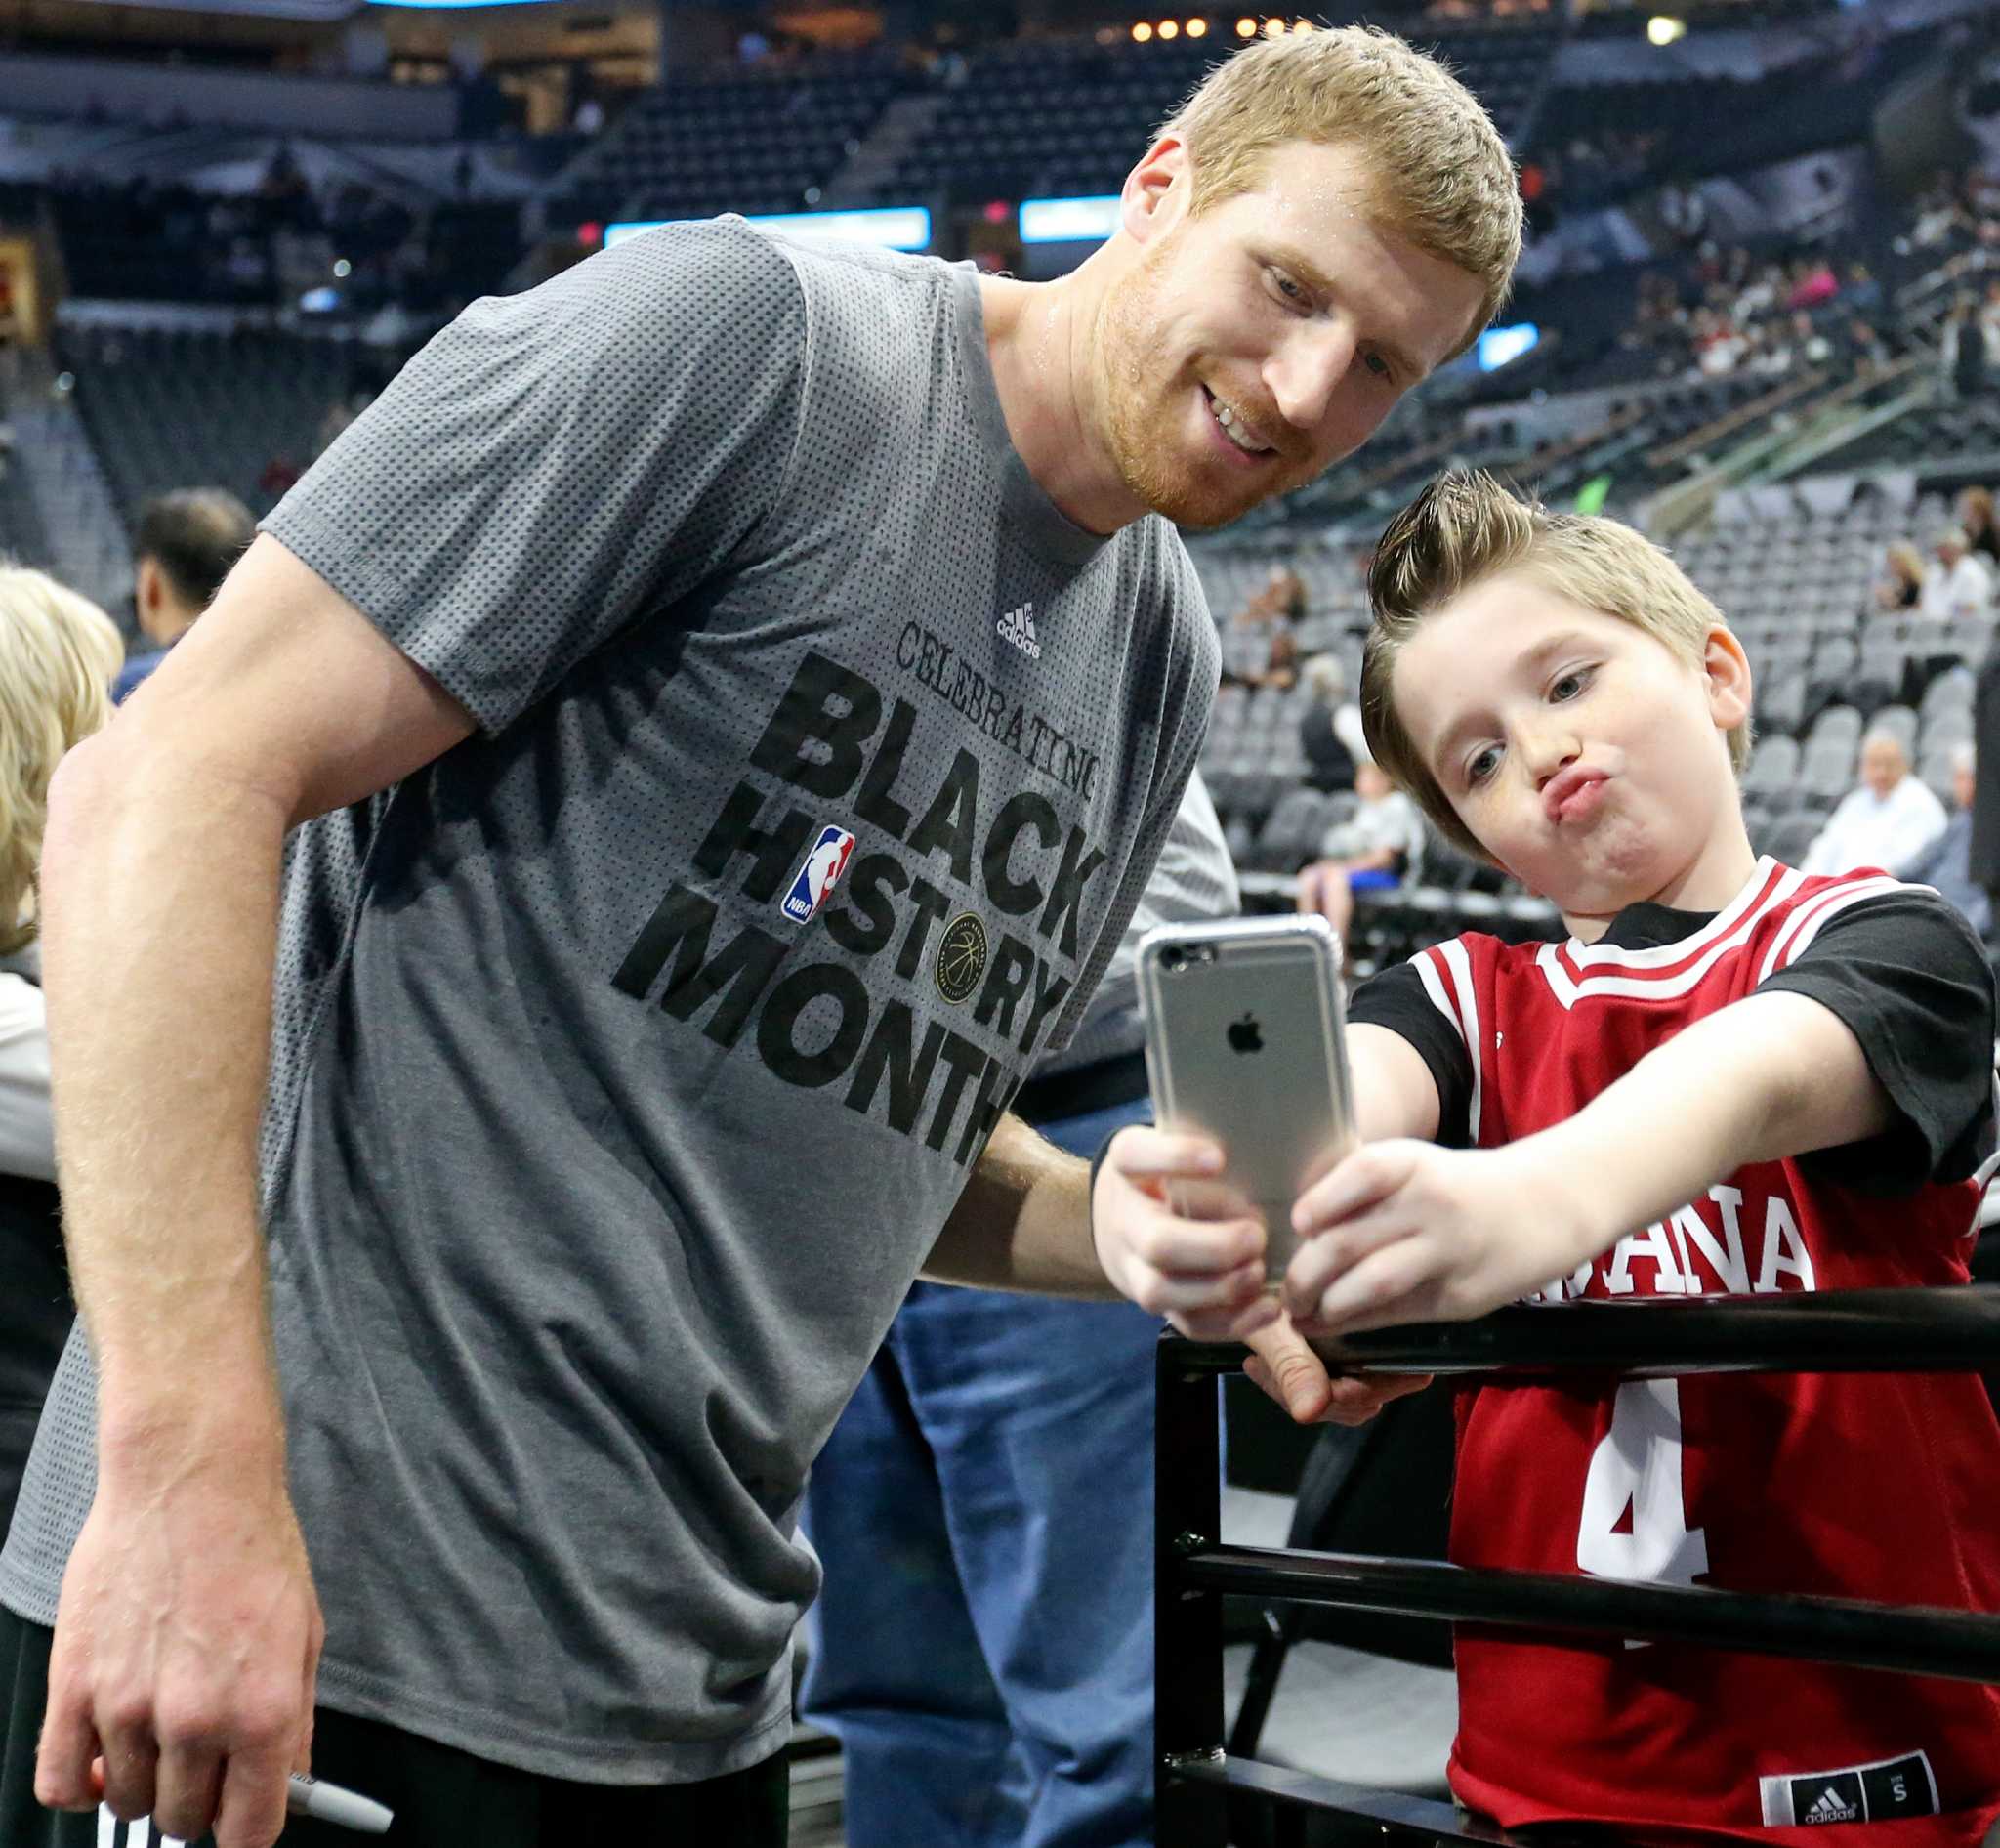 Matt Bonner shares his love of sandwiches and Concord with his